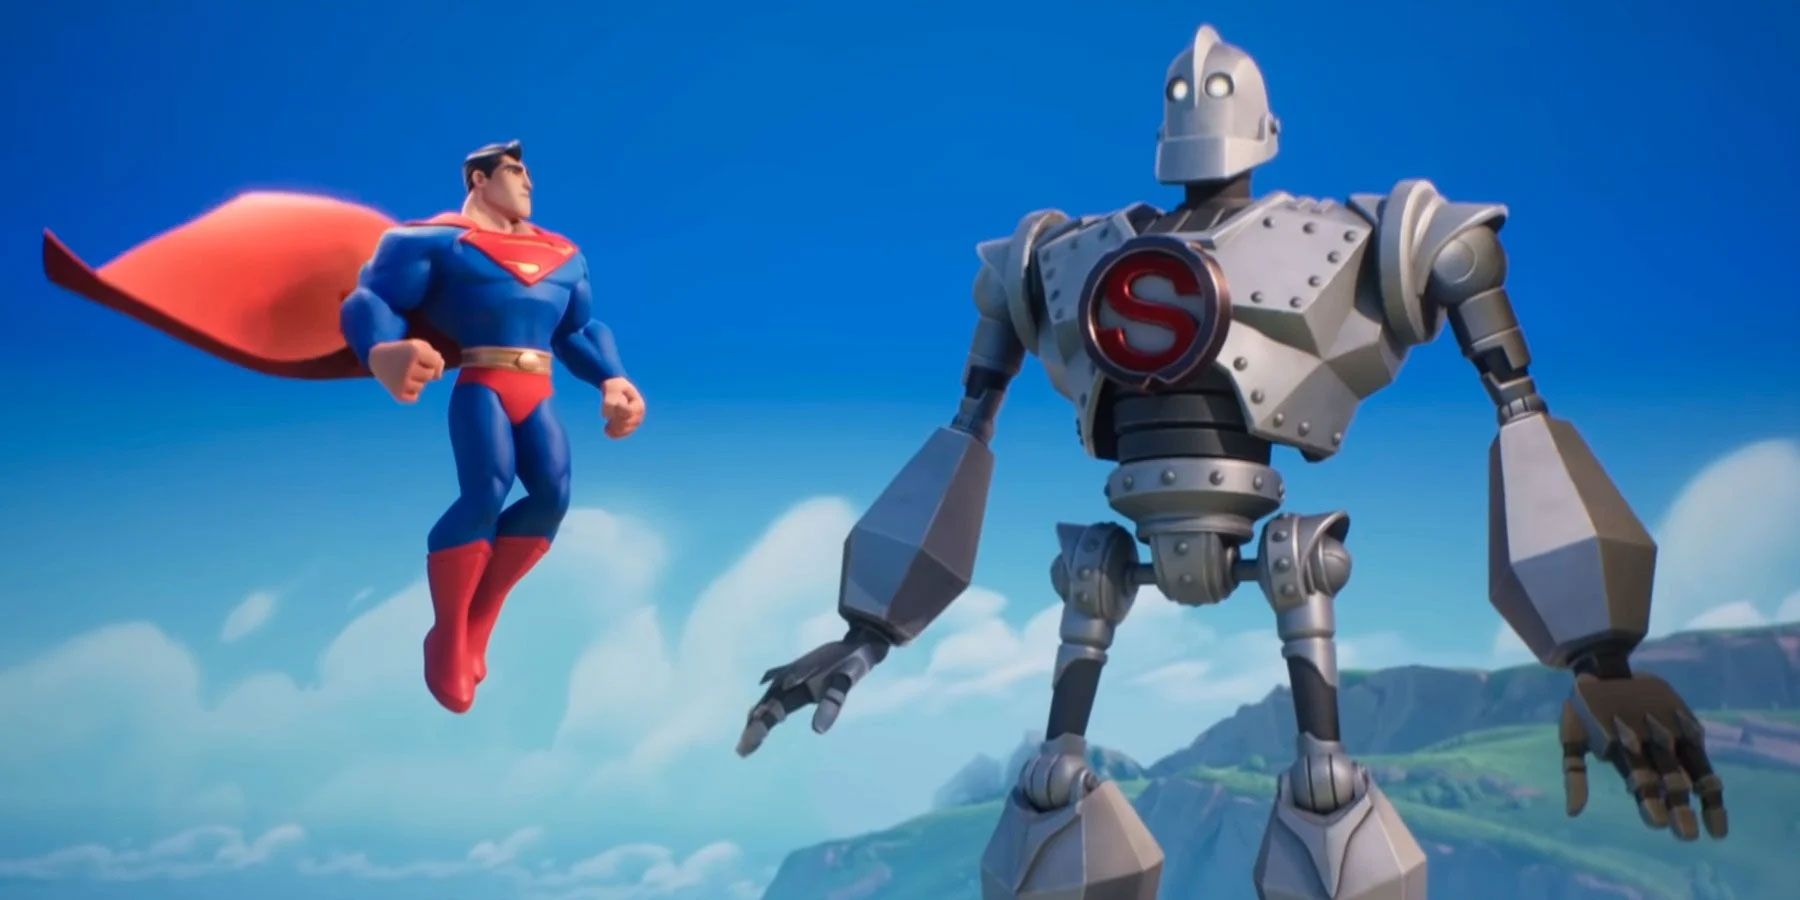 An image of Multiversus' the Iron Giant and Superman flying in the sky